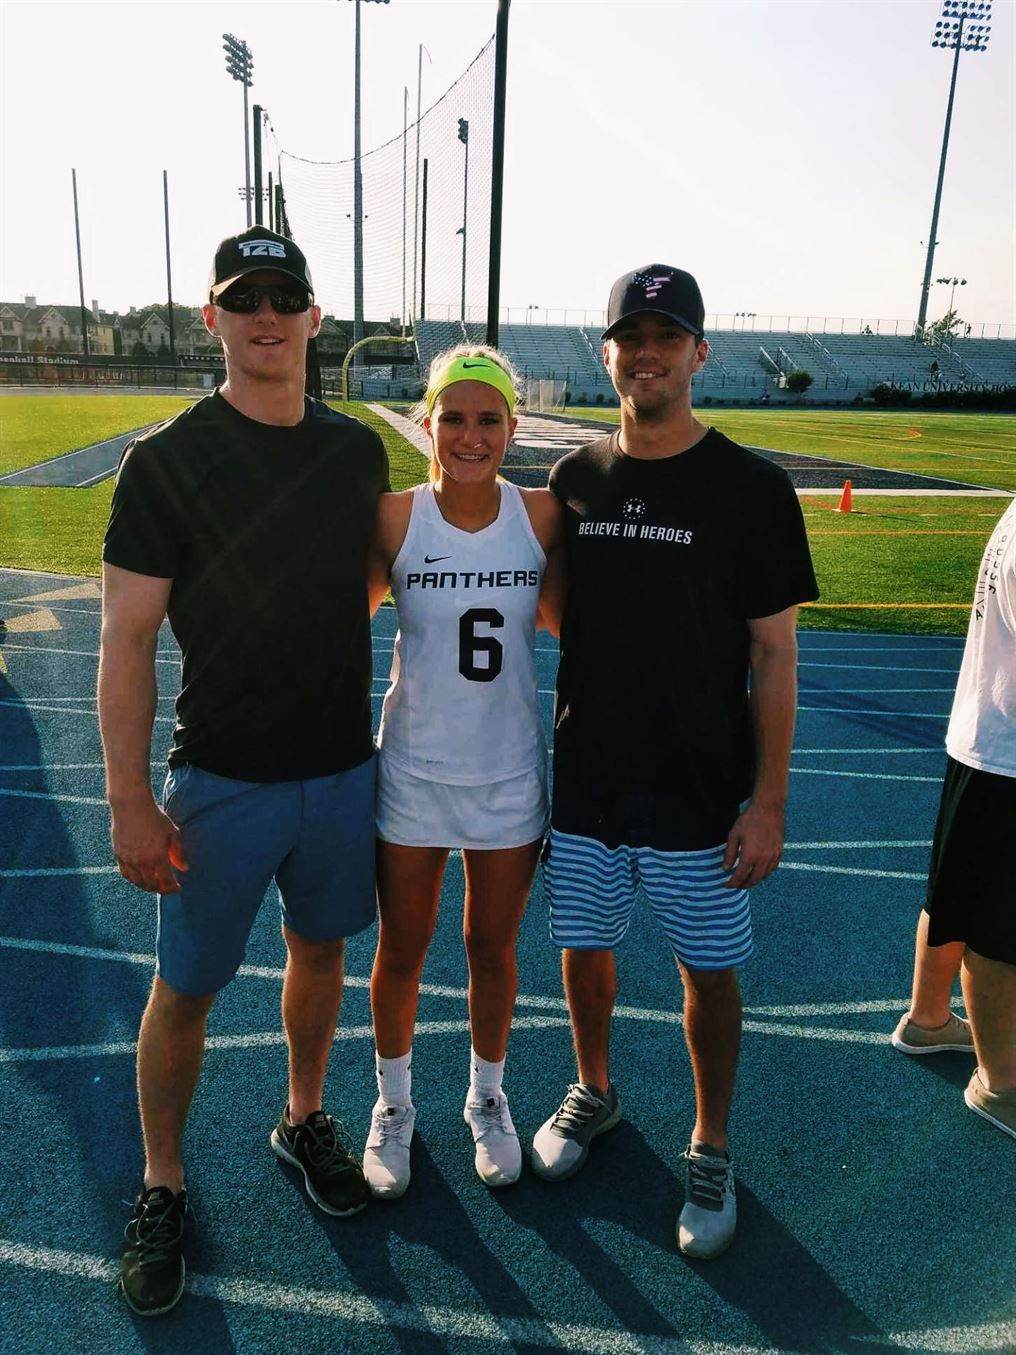 Tristin Konen with her brothers Tyler and Luke after winning the Tournament of Champions at Kean University in 2017. Photo Courtesy of Tristin Konen